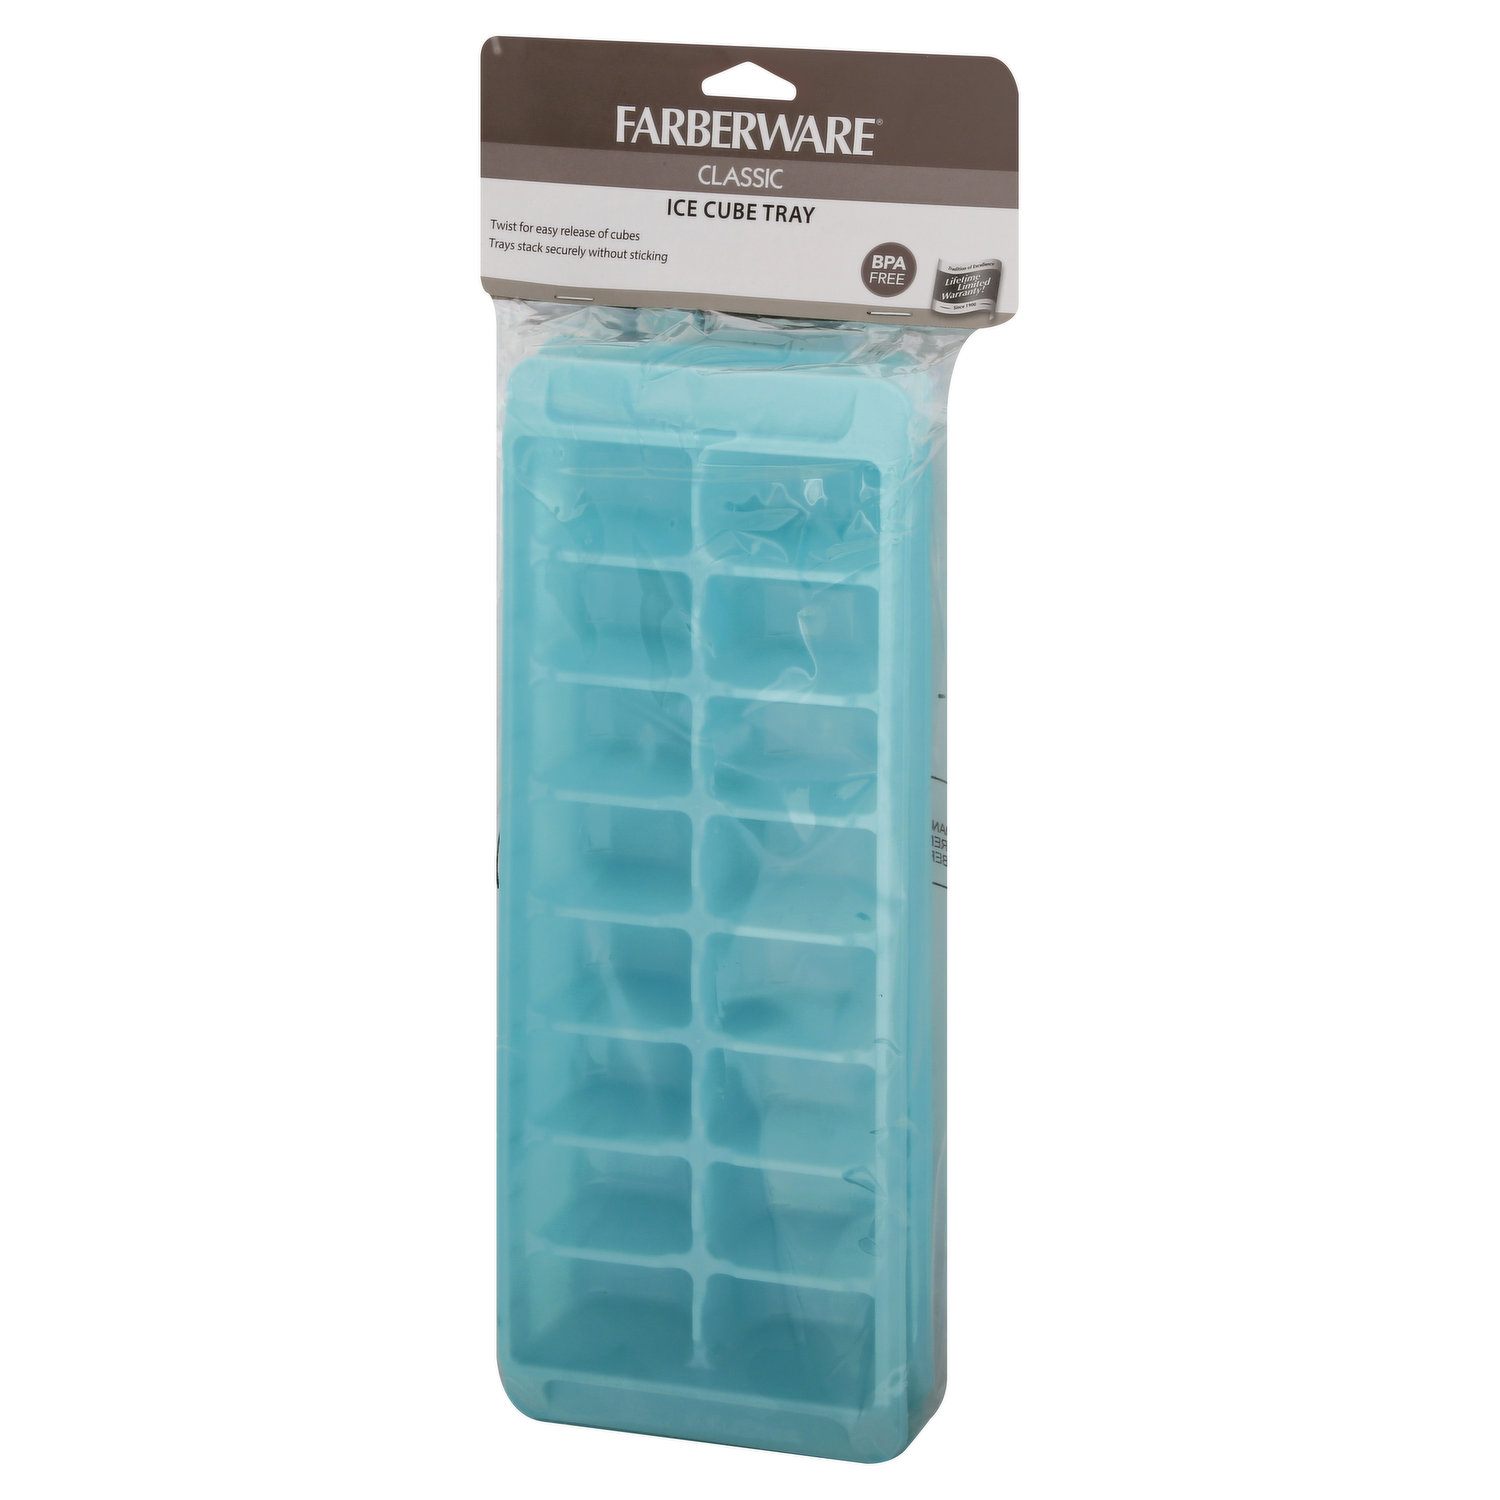 Knions 2 Large Silicone Ice Cube Tray and 2 Mini Ice Cube Trays